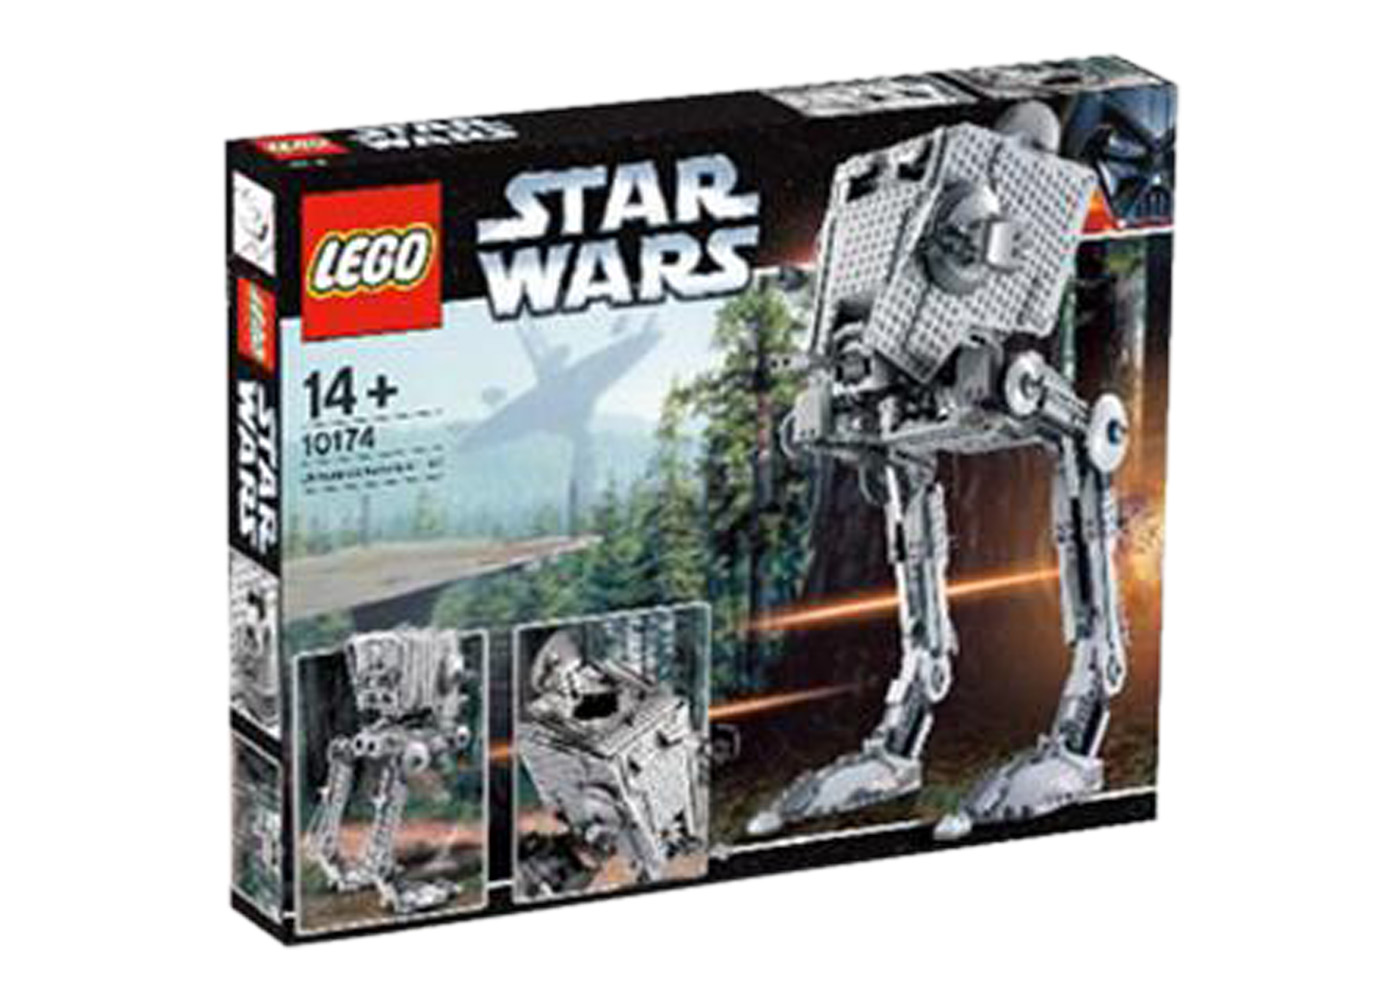 LEGO Star Wars Imperial AT-ST Set 10174